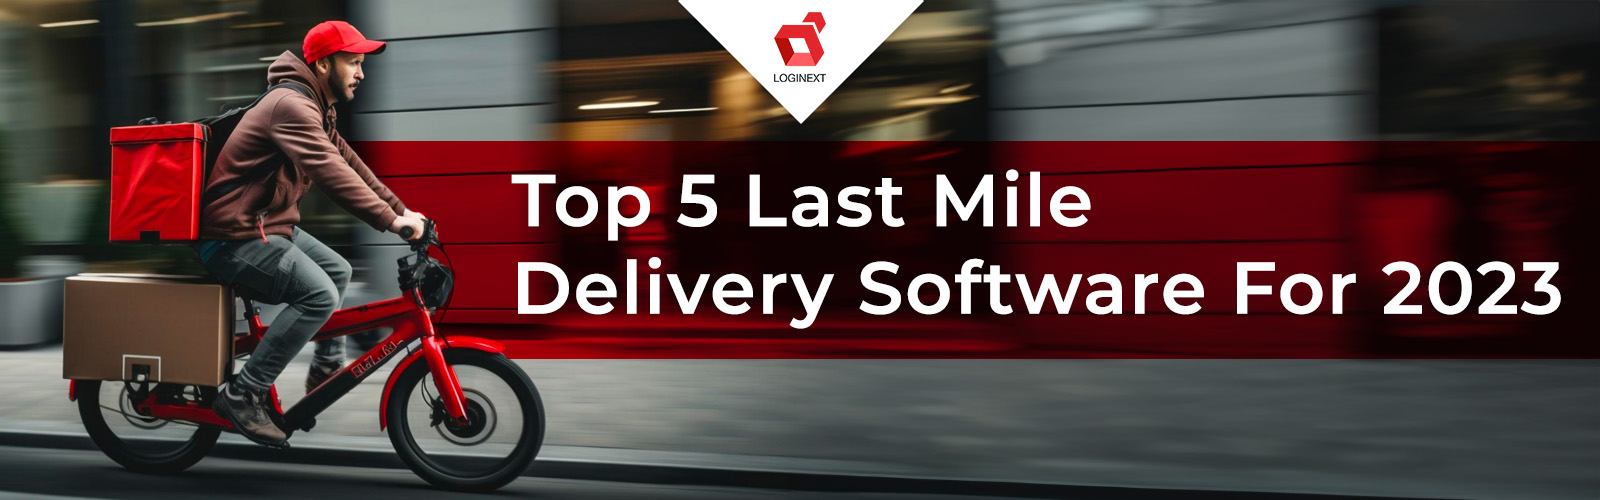 Top 5 Last Mile Delivery Software